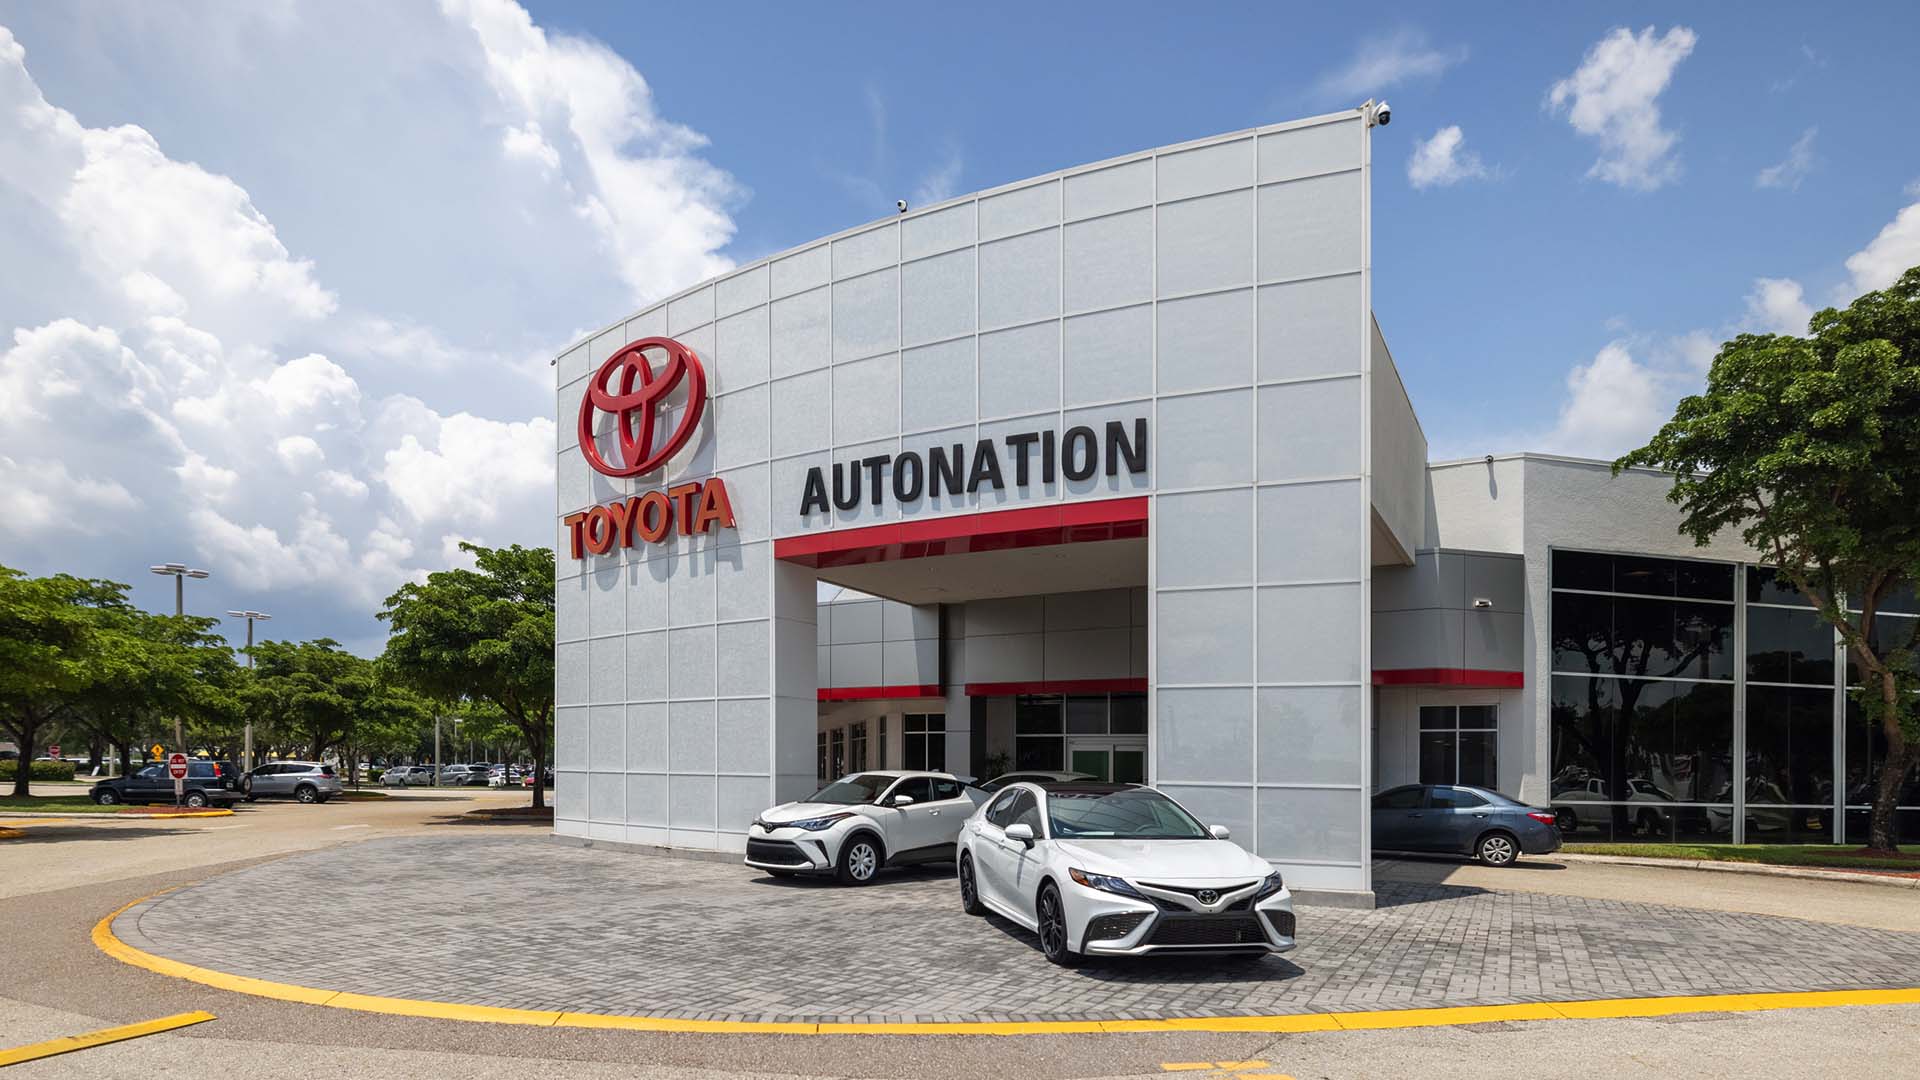 Exterior view of AutoNation Toyota Fort Myers, with a partly cloudy blue sky. The building is tall and grey and has some large windows. Several vehicles can be seen parked near the vehicle.